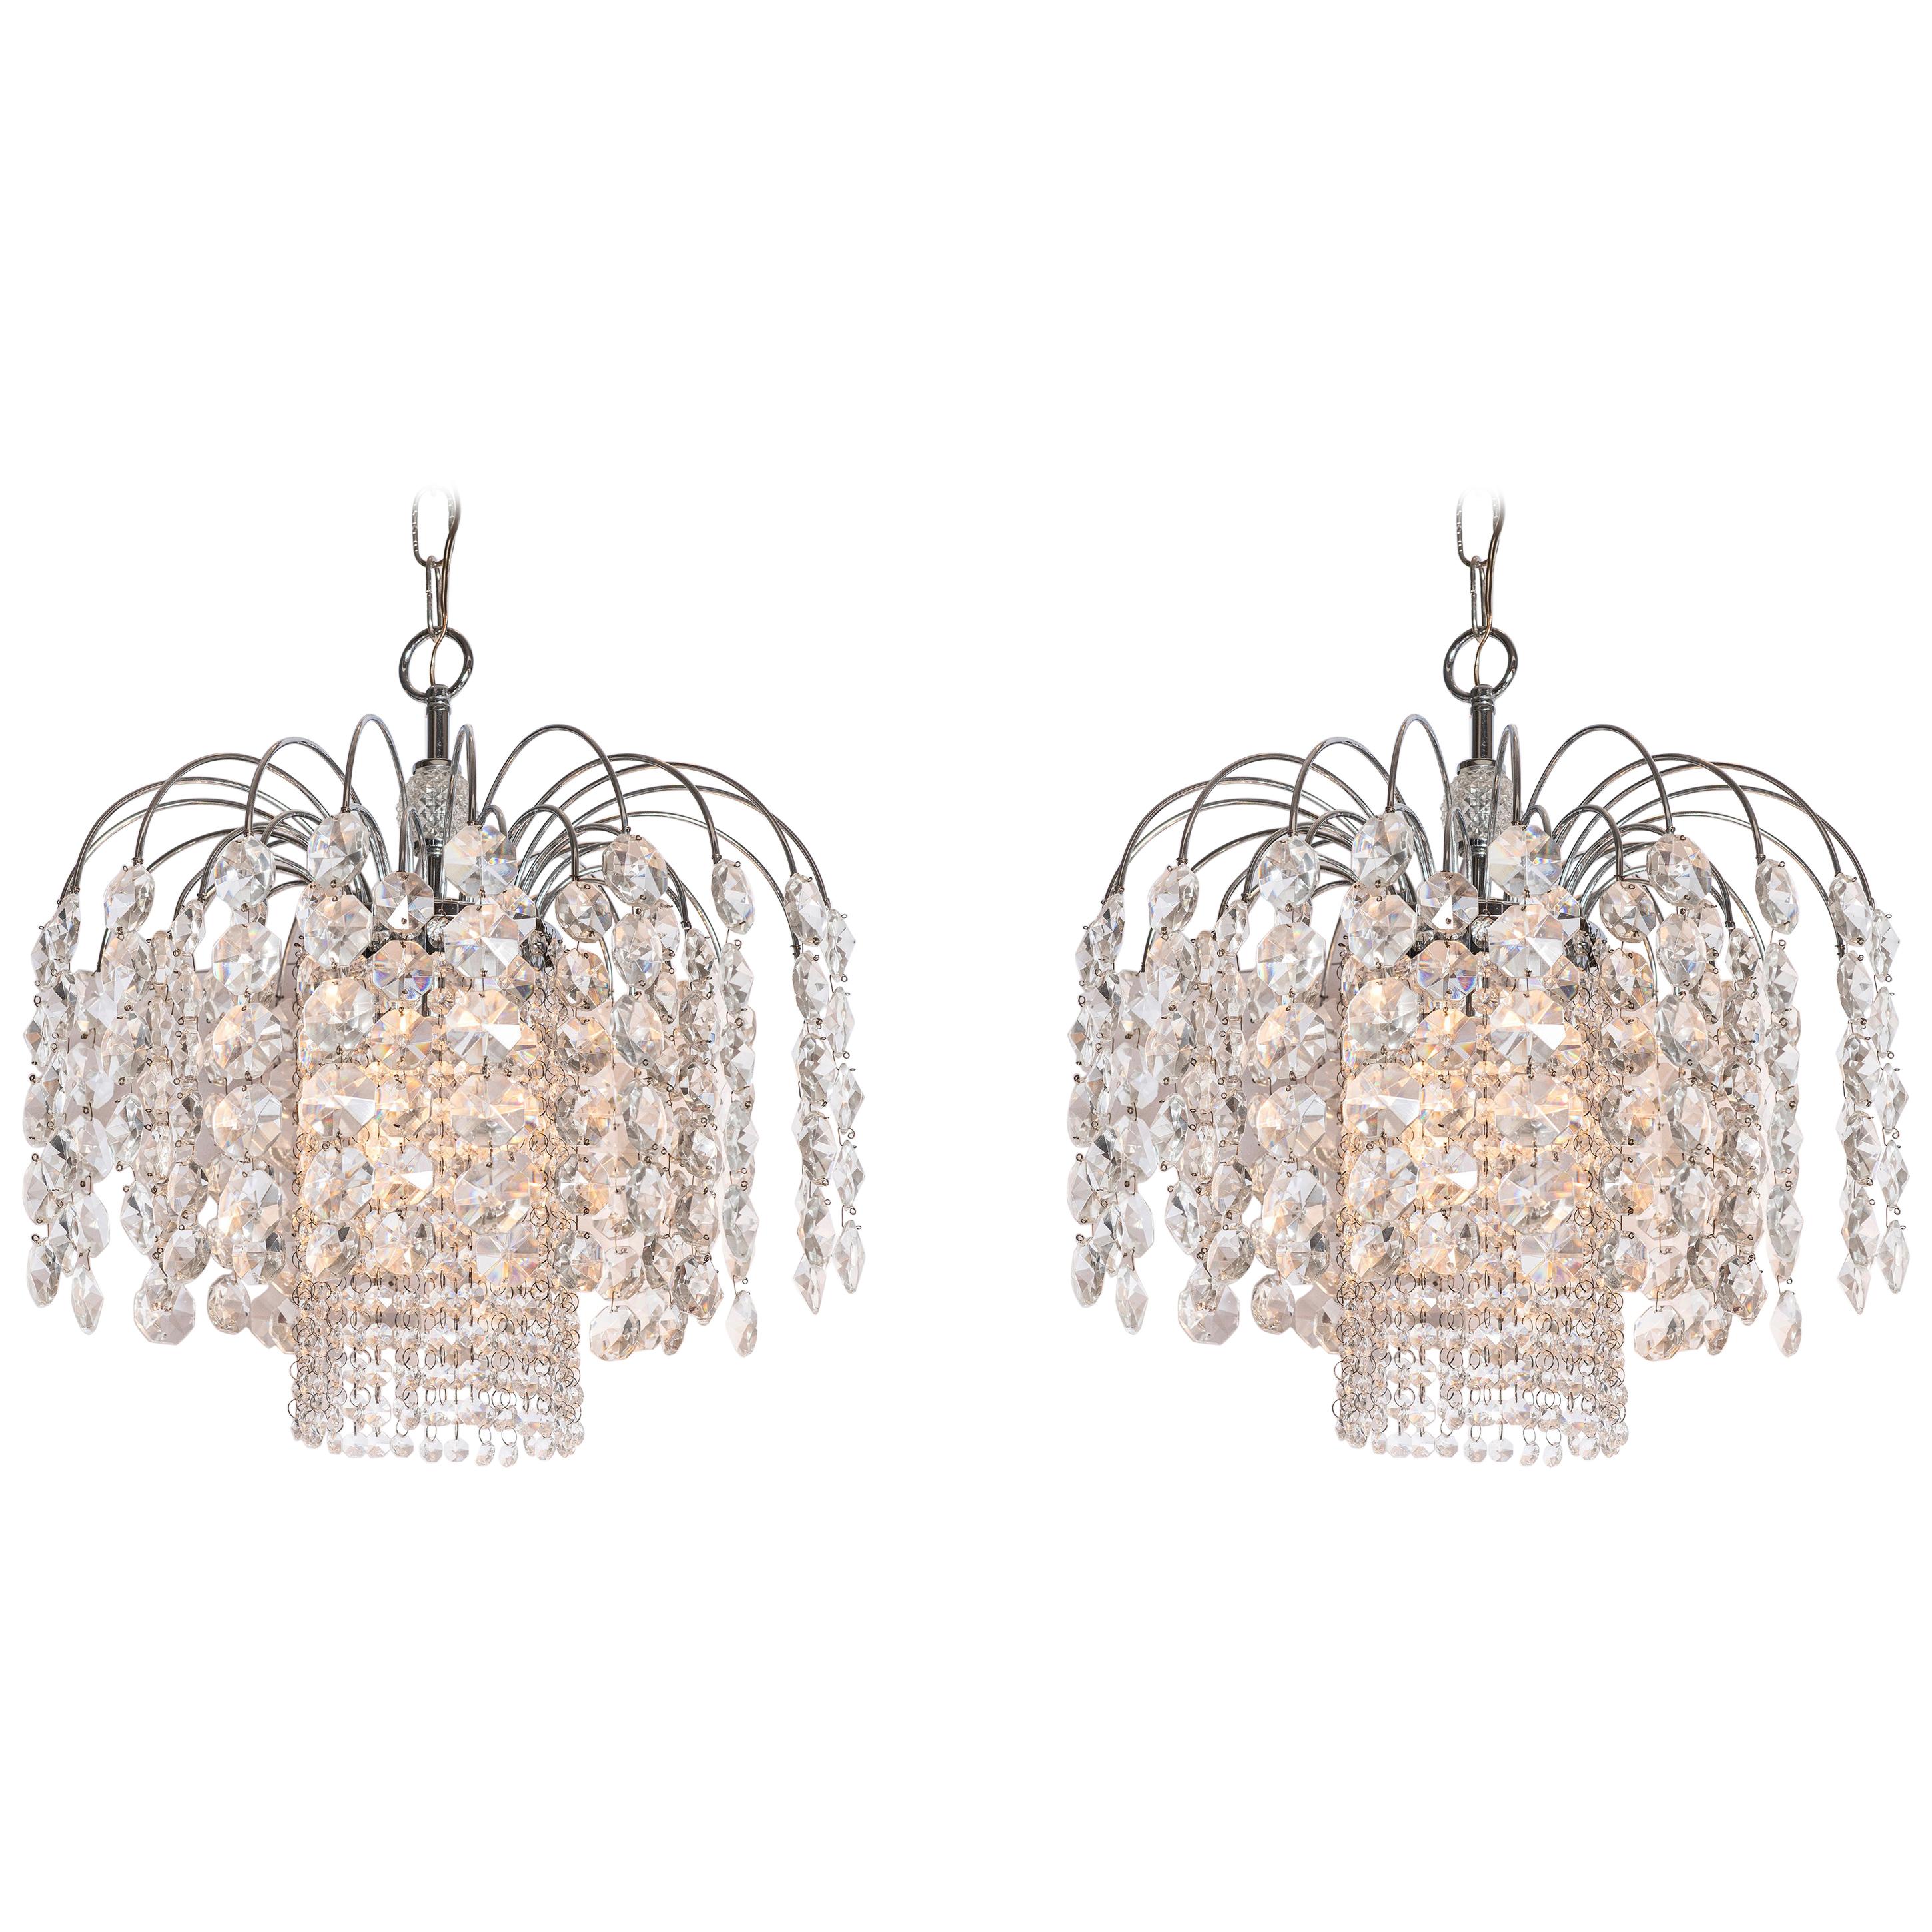 Pair of Crystal and Chrome Chandelier, Attributed to Swarovski, Austria